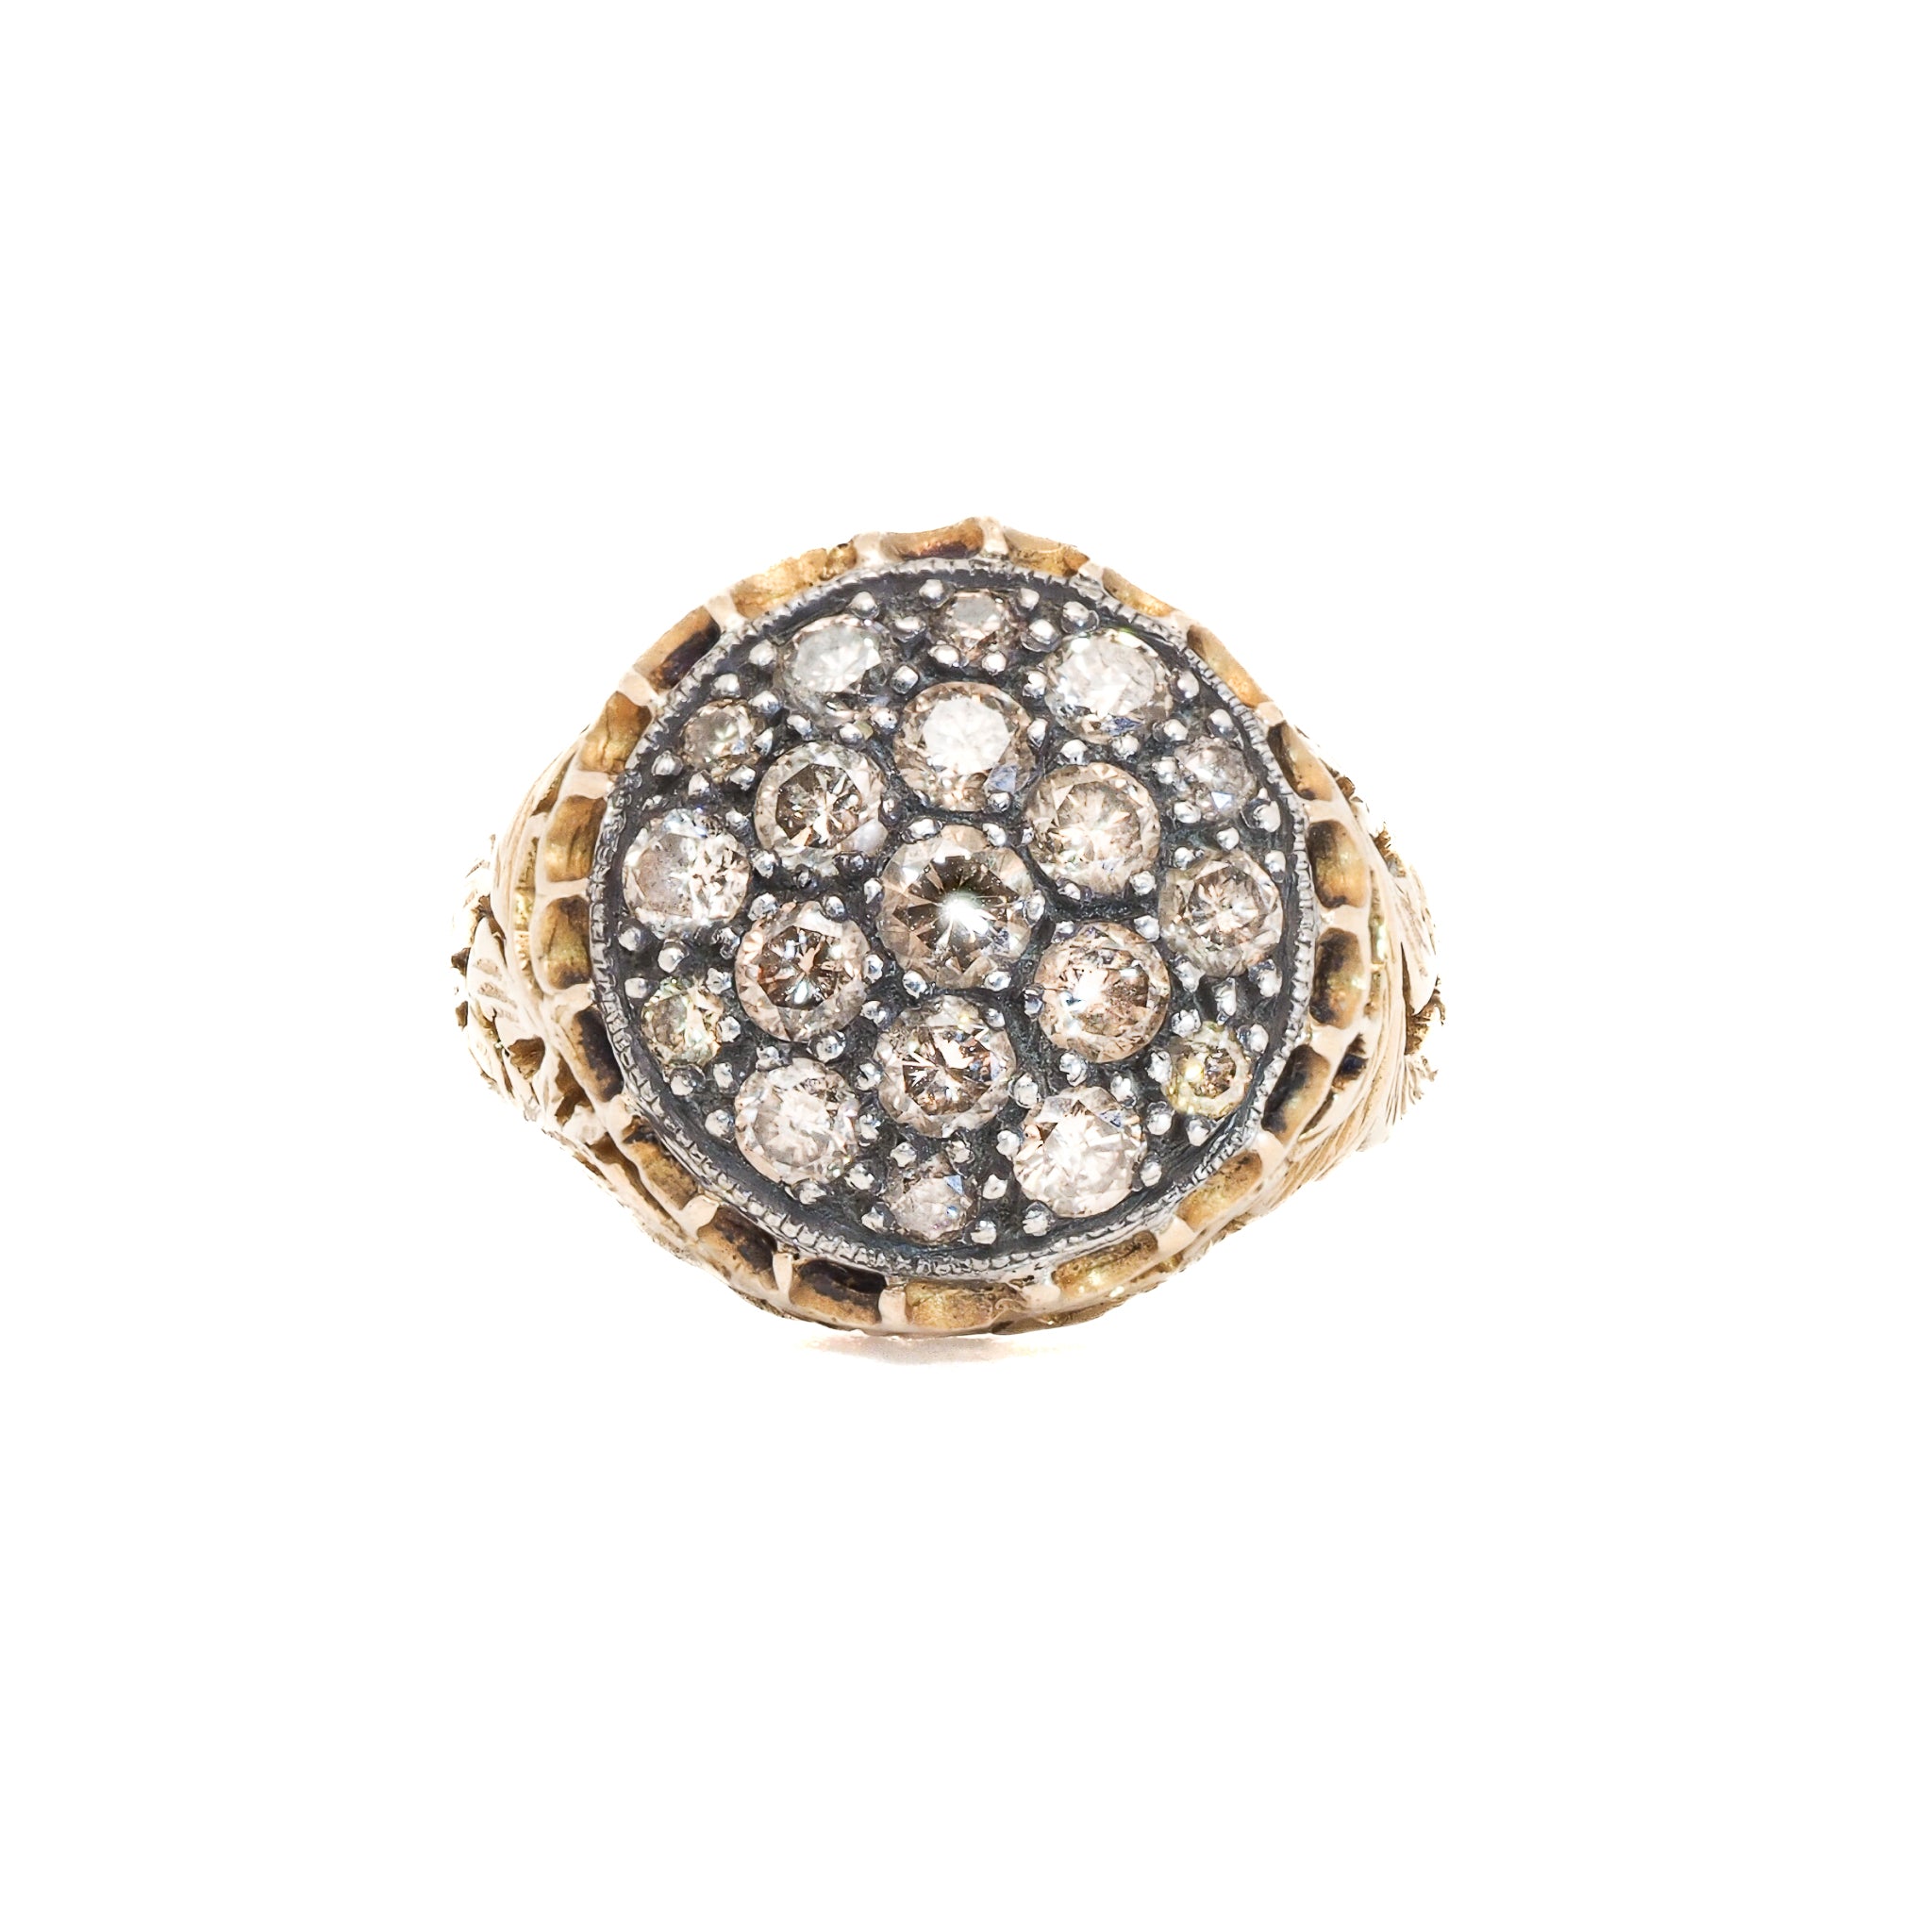 Close-up of Elegant Handcrafted Gold and Diamond Ring showcasing intricate details and sparkling brown diamonds.